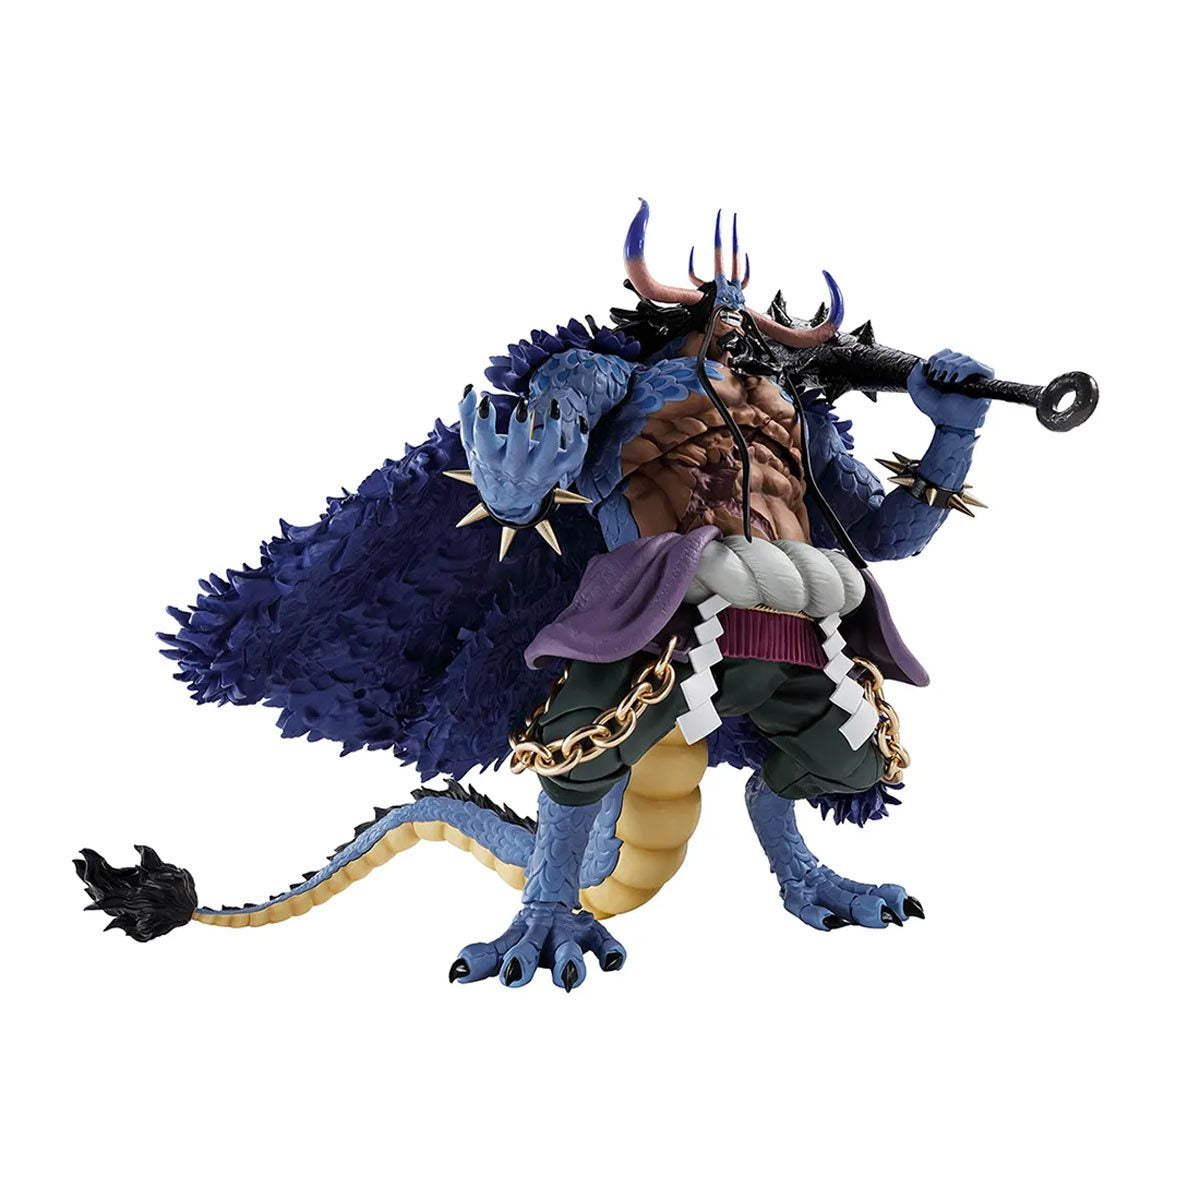 One Piece Kaidou King of the Beasts Man-Beast Form Action Figure by S.H.Figuarts -SH Figuarts - India - www.superherotoystore.com